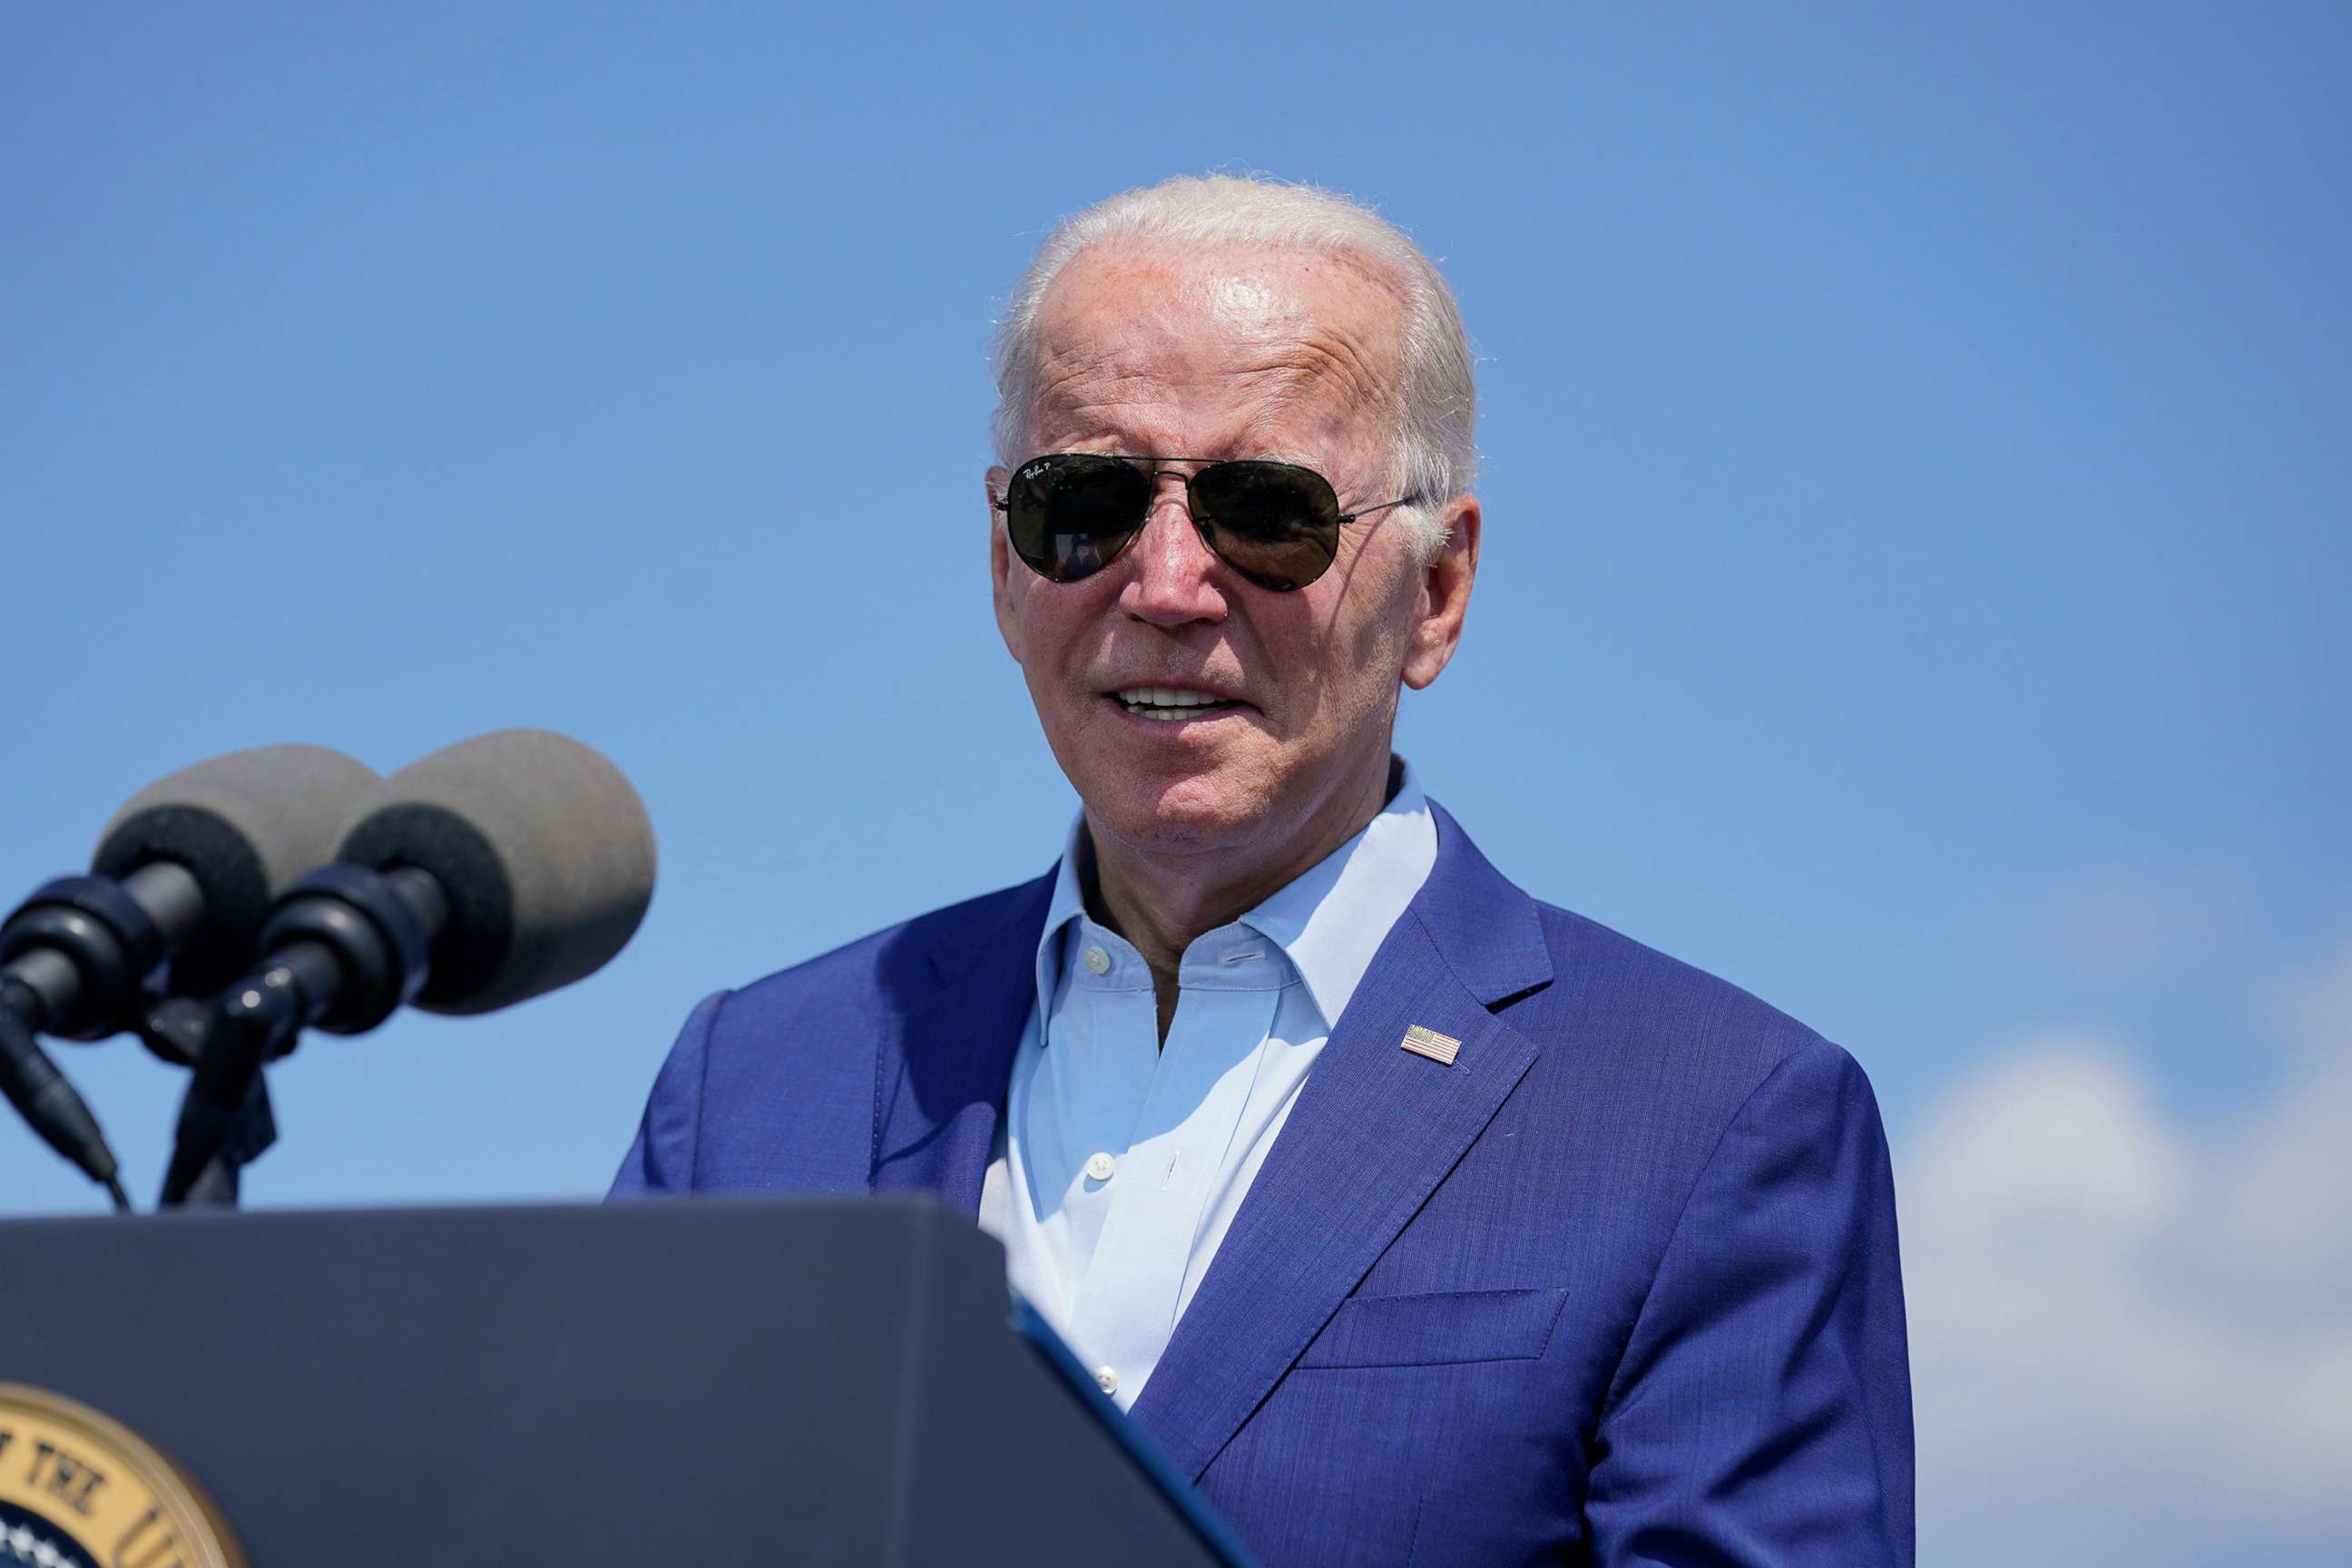 PHOTO: President Joe Biden speaks about climate change and clean energy at Brayton Power Station, on July 20, 2022, in Somerset, Mass.